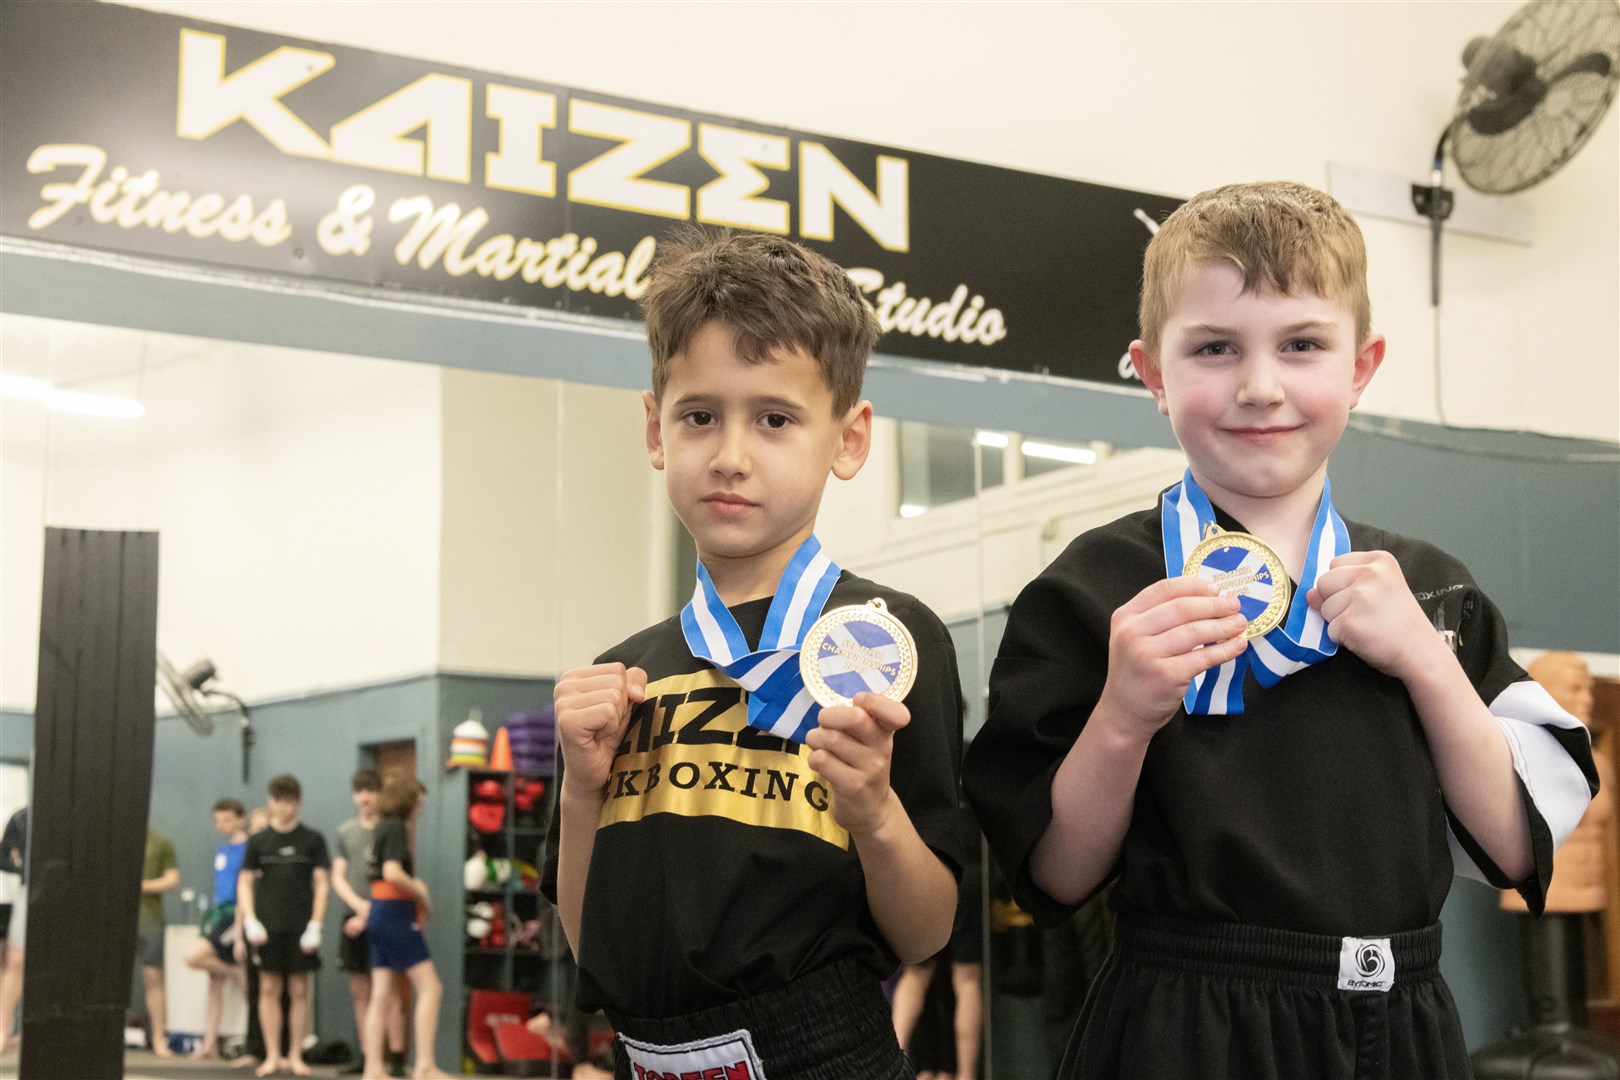 Isaac Hussian (left) and Ross McGregor (right) from Kaizen Kickboxing have won medals at their recent competition in Paisley...Pictures: Beth Taylor.